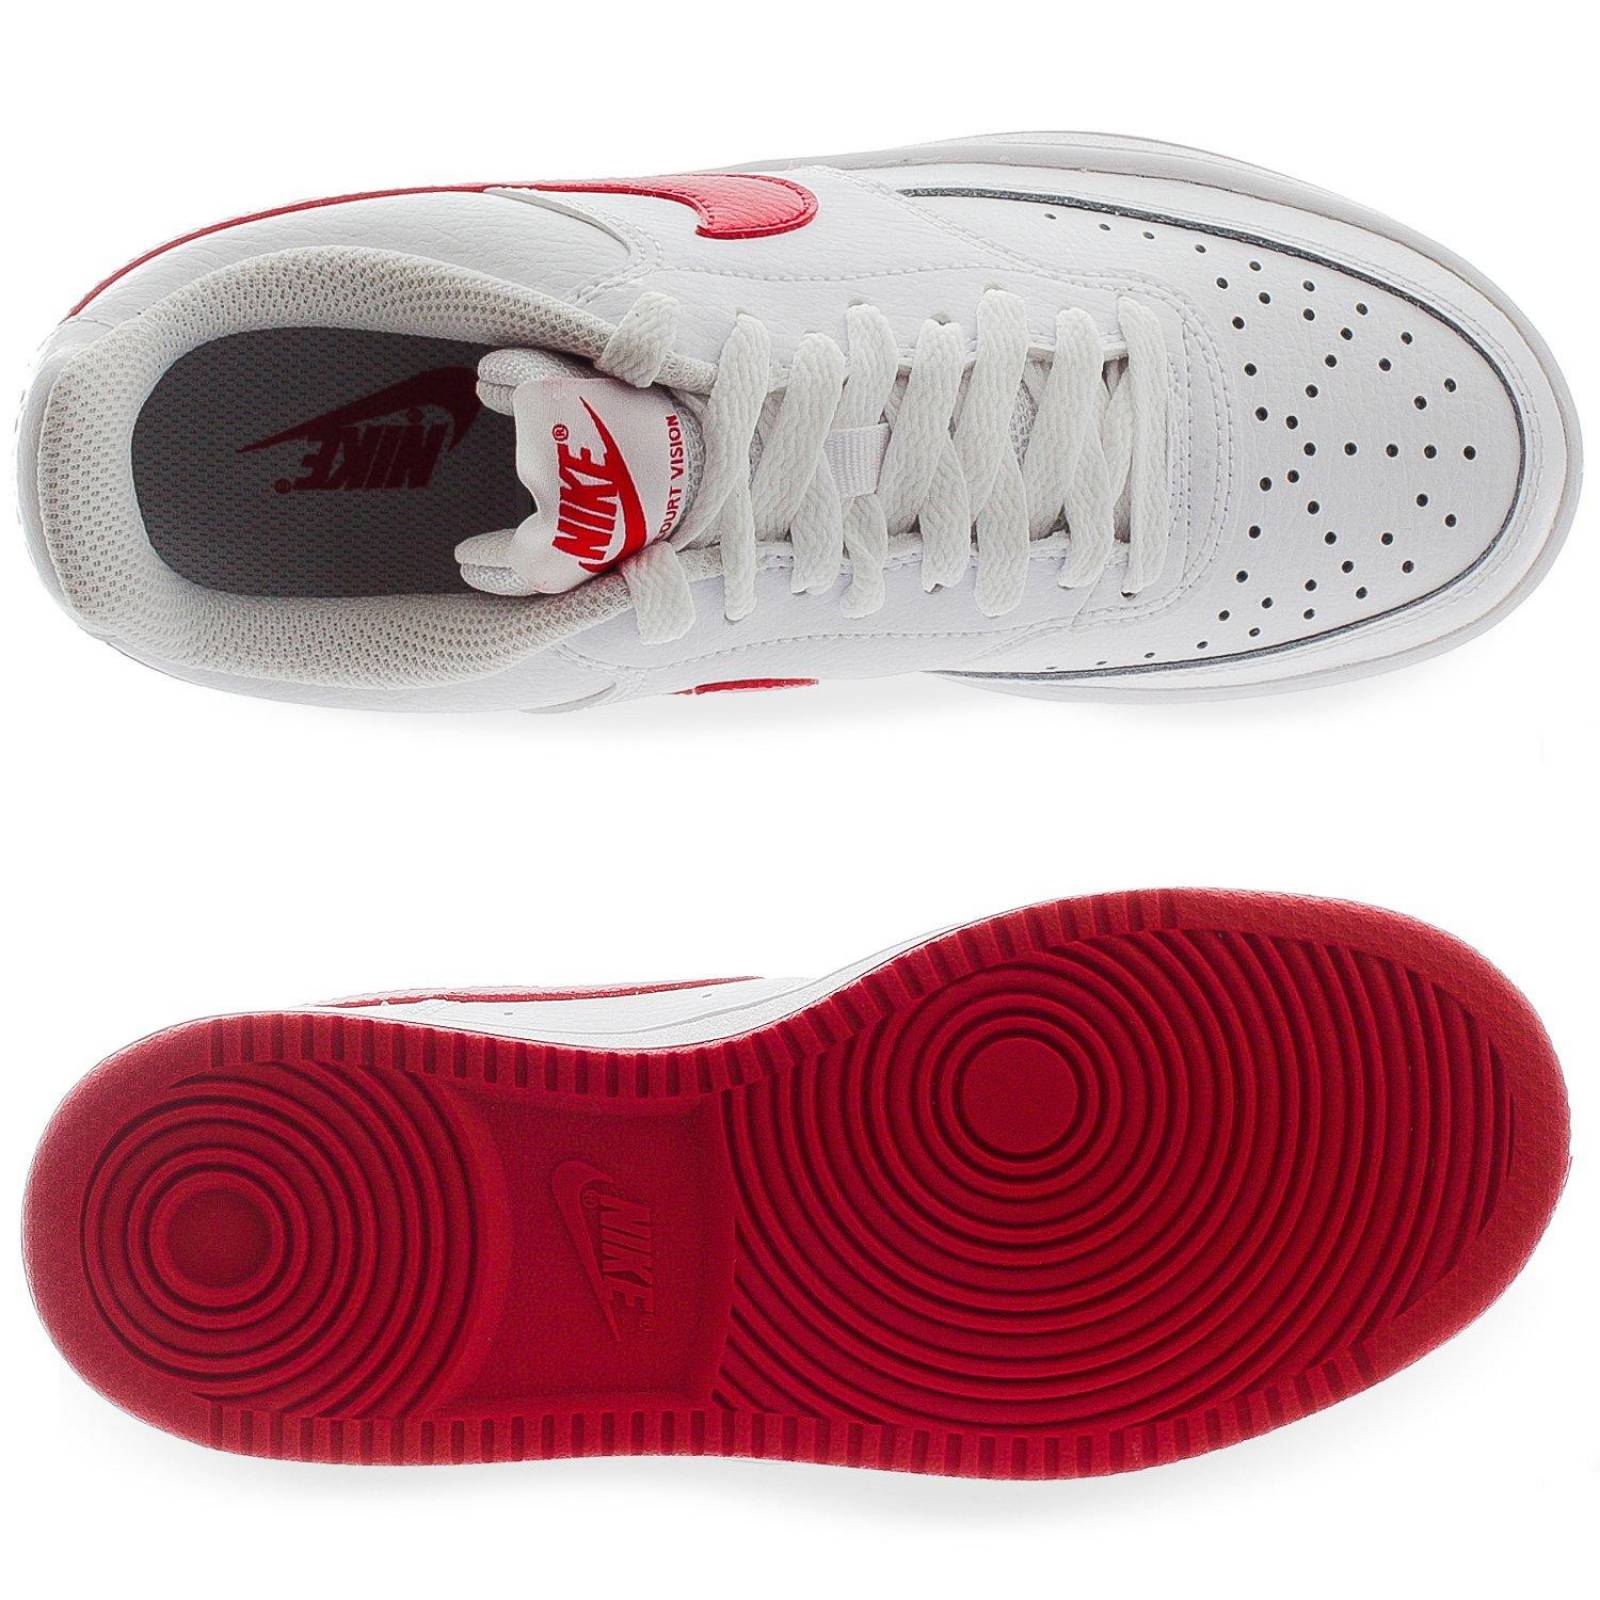 Tenis Nike Court Vision Low - CD5434101 - Blanco - Mujer 